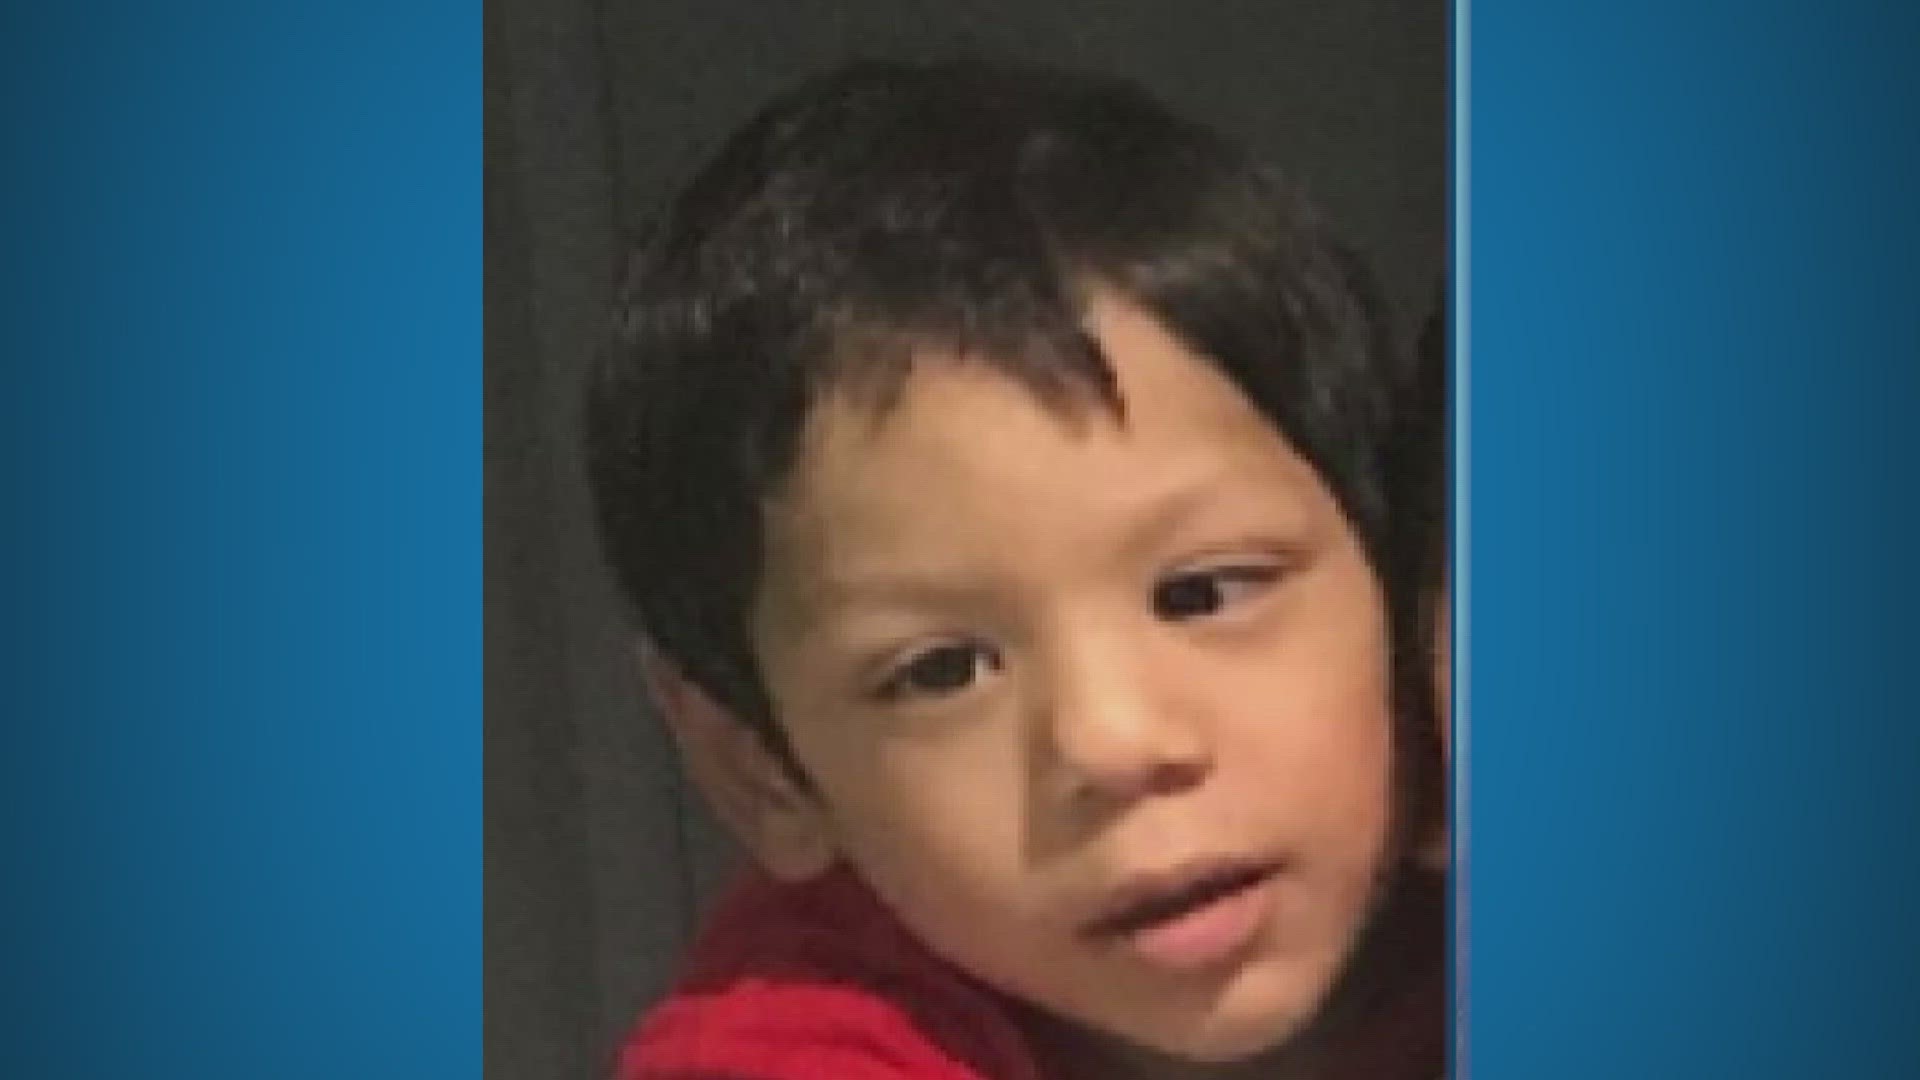 An AMBER Alert was first issued saying Noel Rodriguez-Alvarez hadn't been seen since Friday. Police say family members hadn't seen him since November 2022.